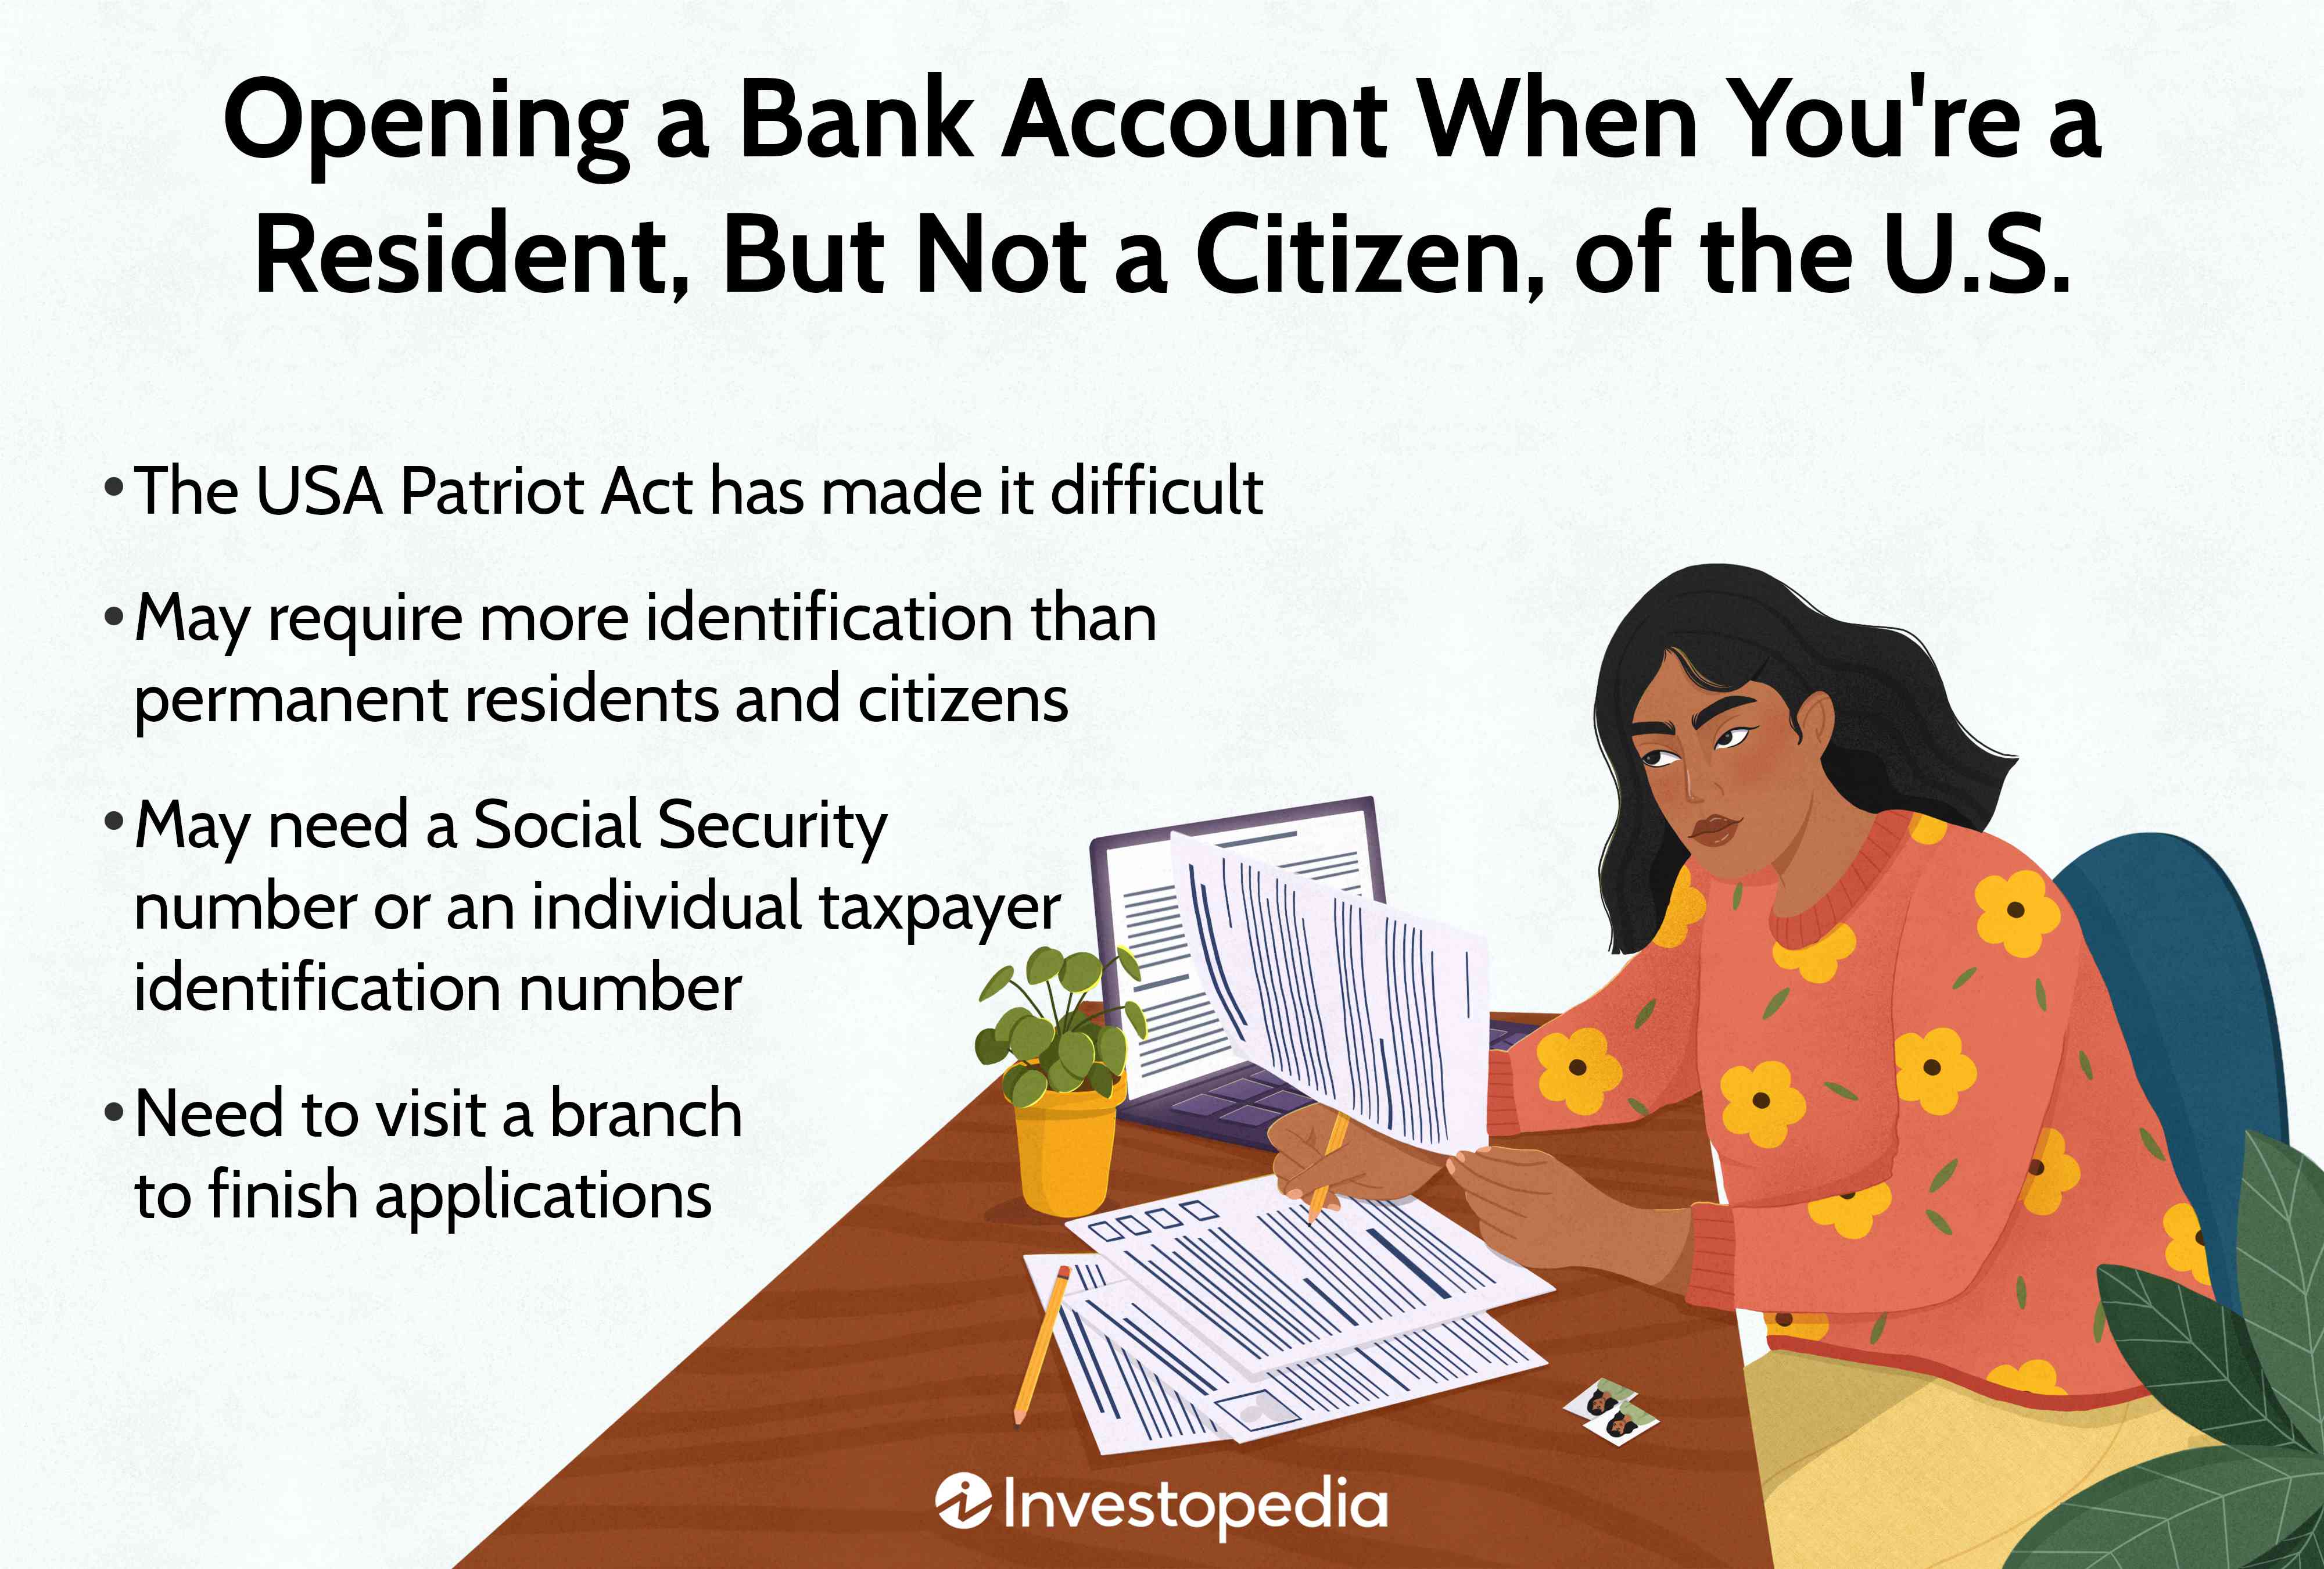 Opening a Bank Account When You're a Resident, But Not a Citizen, of the U.S.